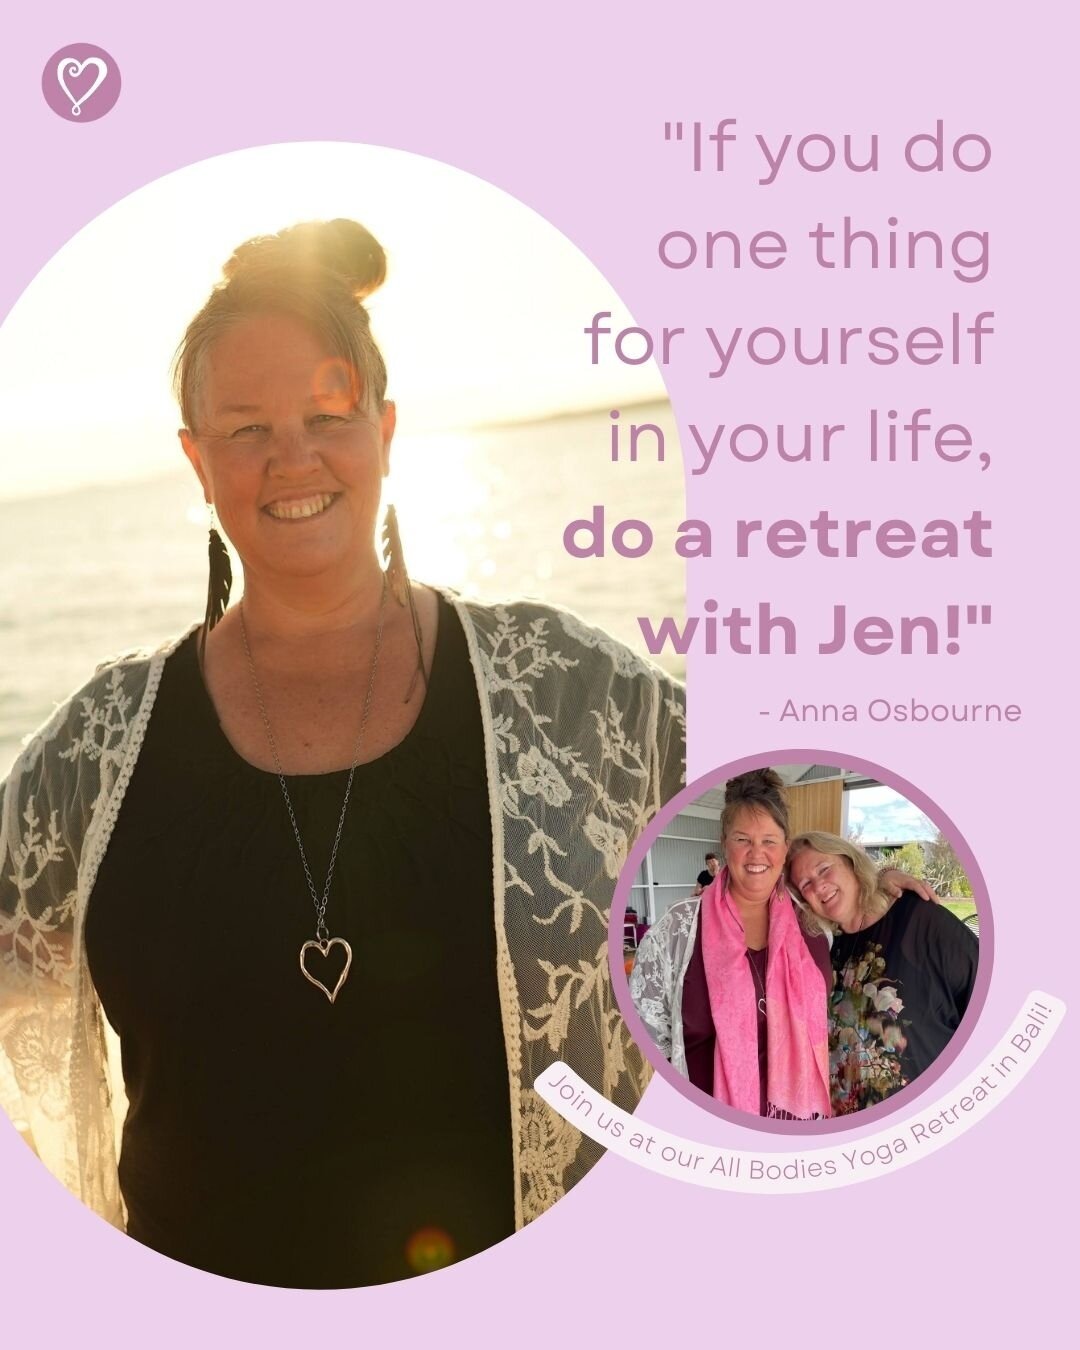 A retreat is transformational - read what others have to say⁠
⁠
Link in bio for Body Peace Retreat options this year⁠
⁠
X⁠
⁠
⁠
#baliretreat #curvyyogretrat #fatyogaretreat #yogaretratnz⁠
#manaretreat